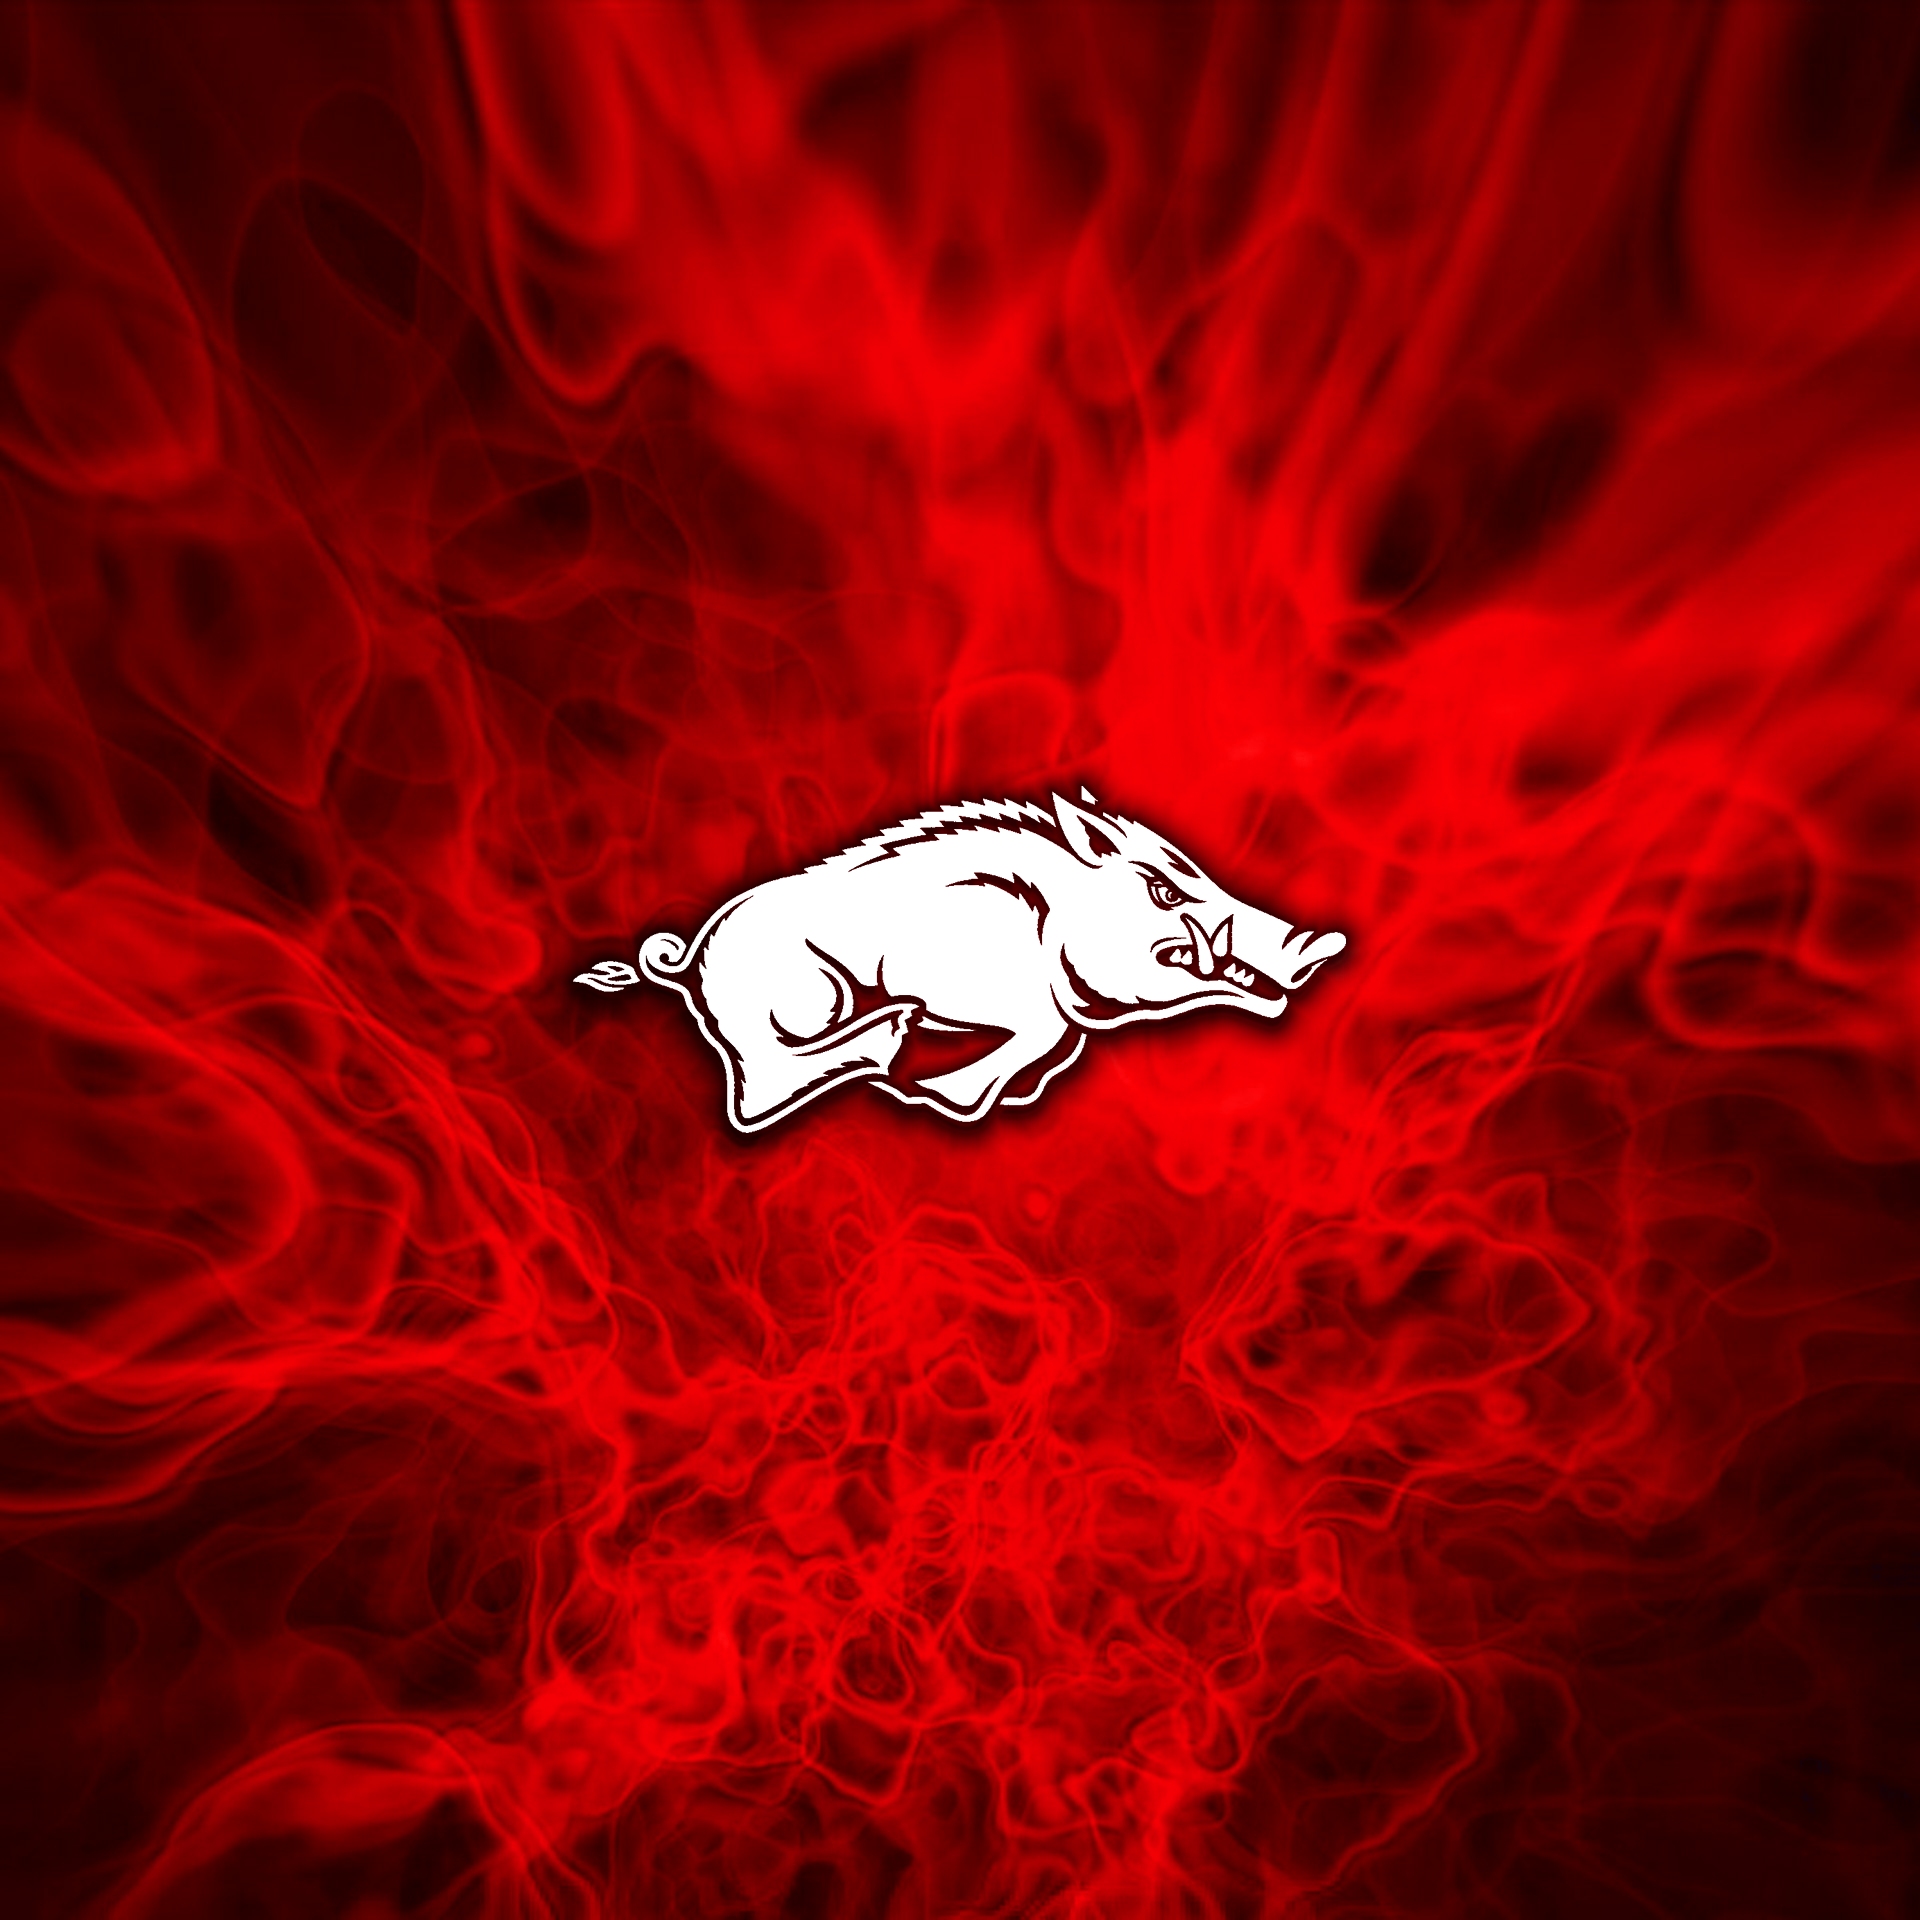 Arkansas Razorback Football på Twitter From the walls of the Louvre to  the wallpaper of your phone  httpstcoGsmoIKwxHA  X